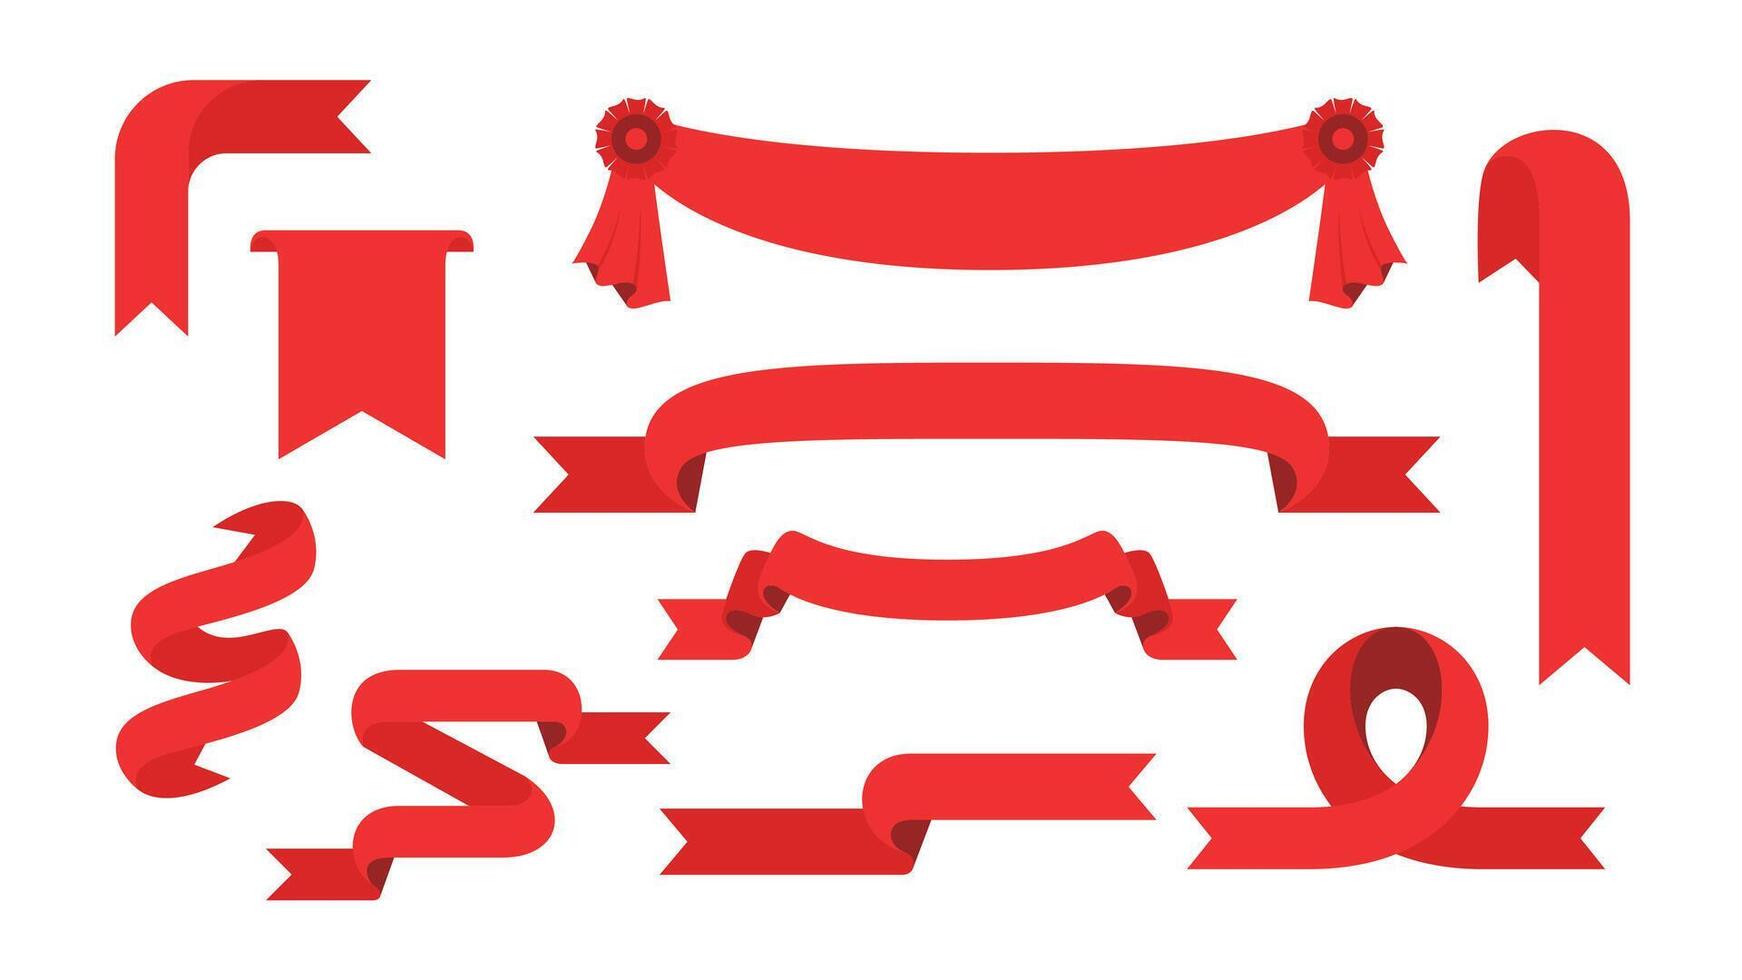 Red Ribbon Decorative Banner Collection vector